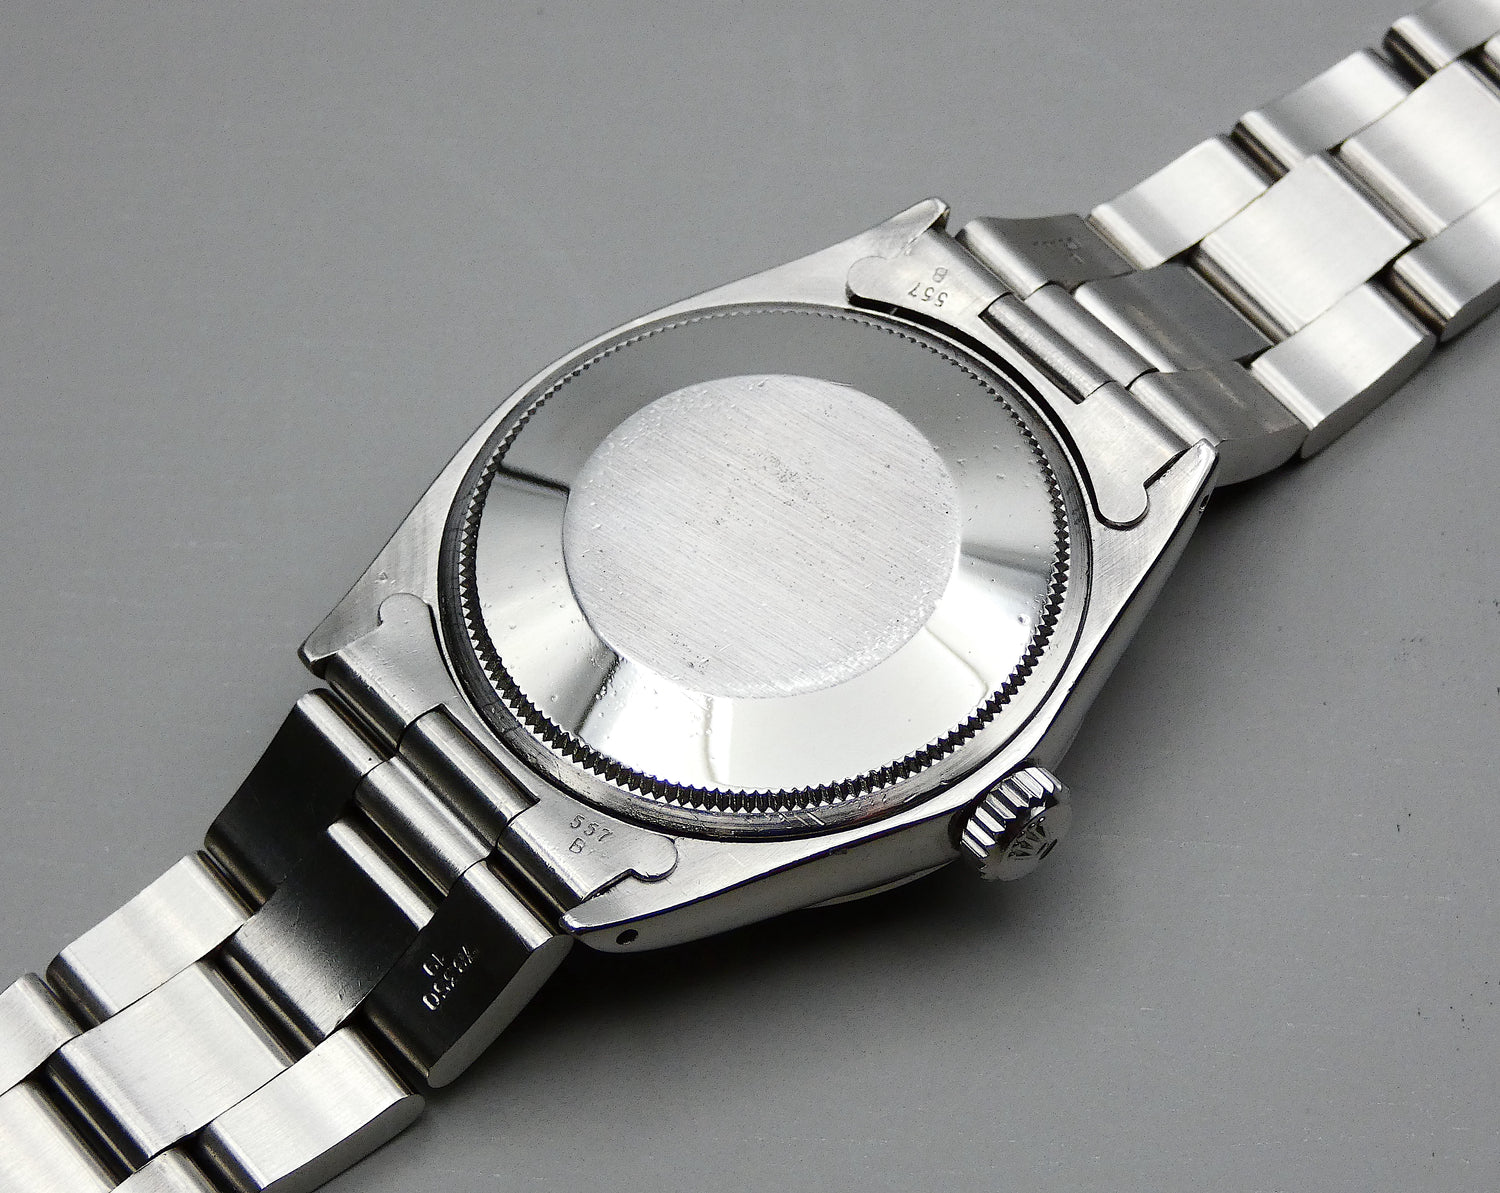 SOLD Rolex Rare Oyster Perpetual Date Shantung / Mosaic dial / 1970